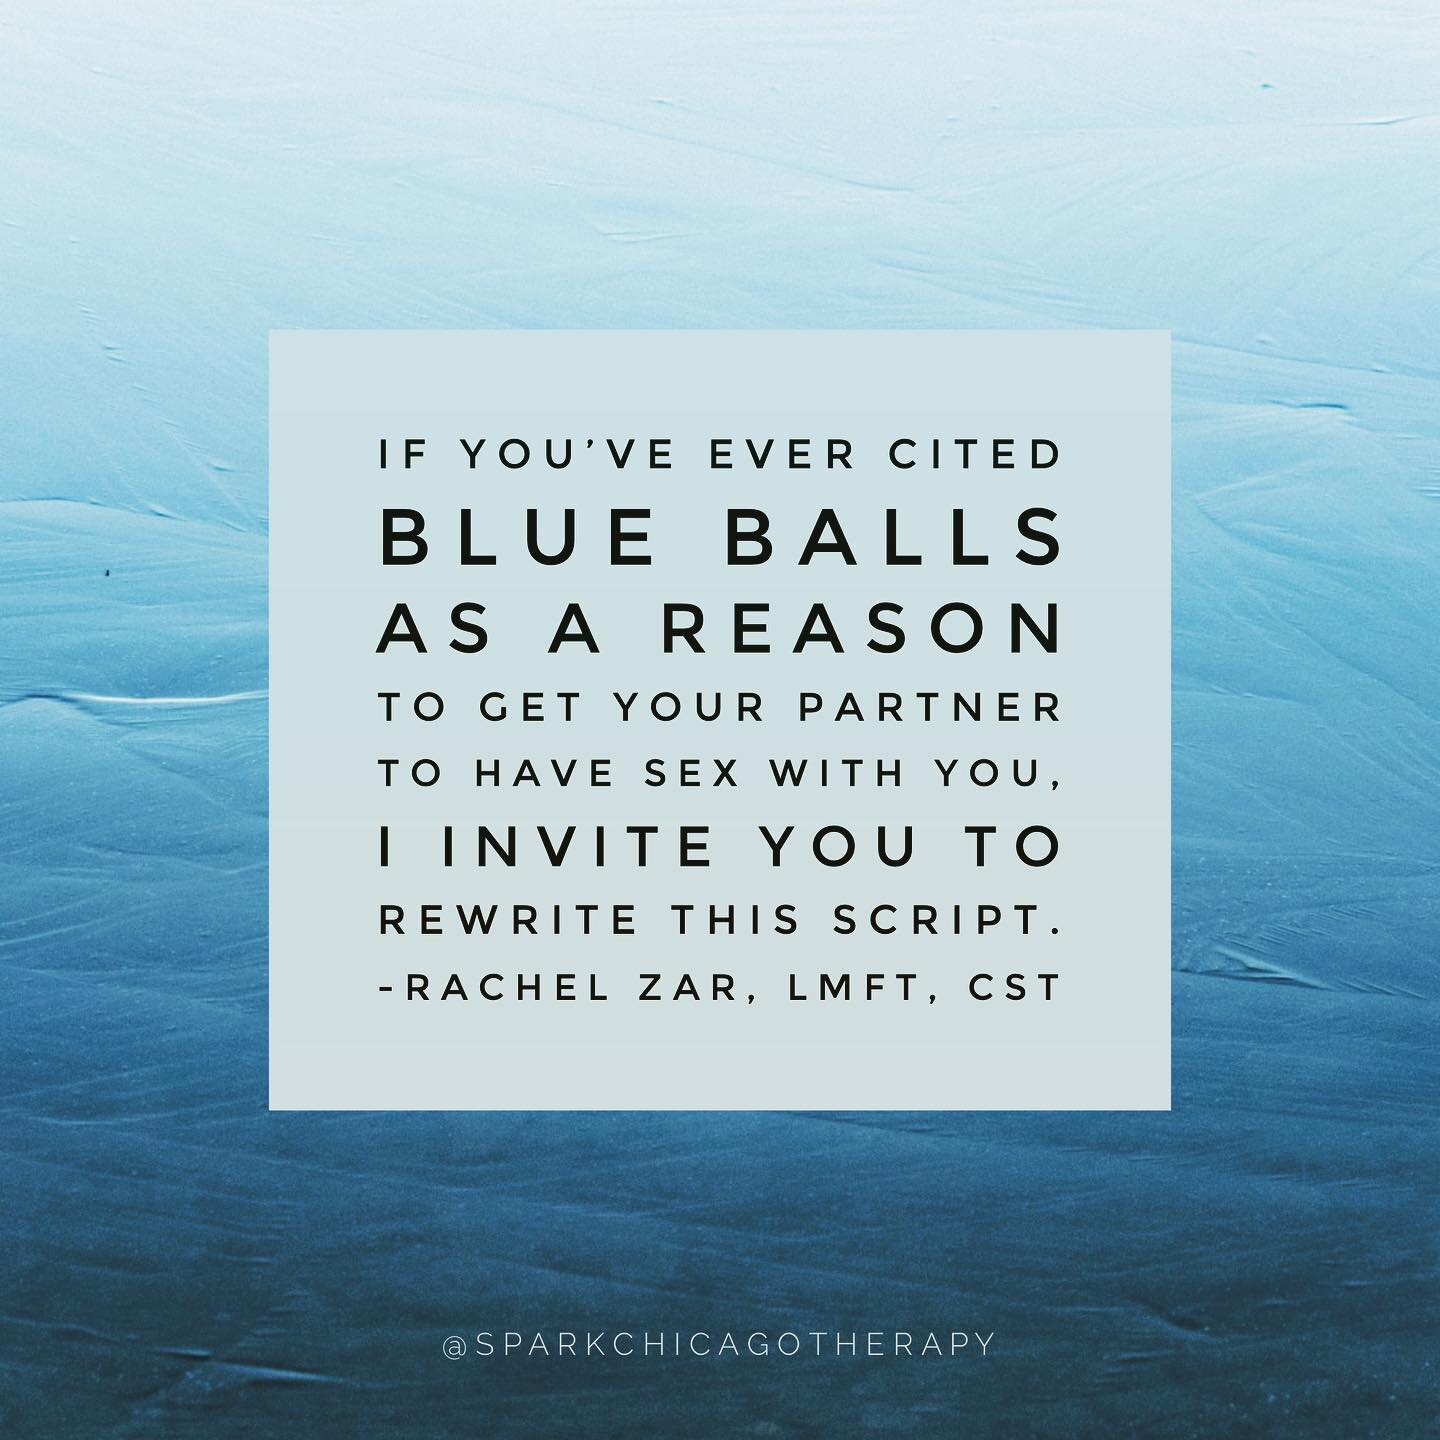 Louder 👏for👏🏼 the 👏🏽people 👏🏾in 👏🏿the back! This is an unmissable blog post, people. For scrotum-owners and vulva-owners alike, today Rachel talks about the dangerous MYTH of blue balls and the damage this coercive narrative leaves. Run, don